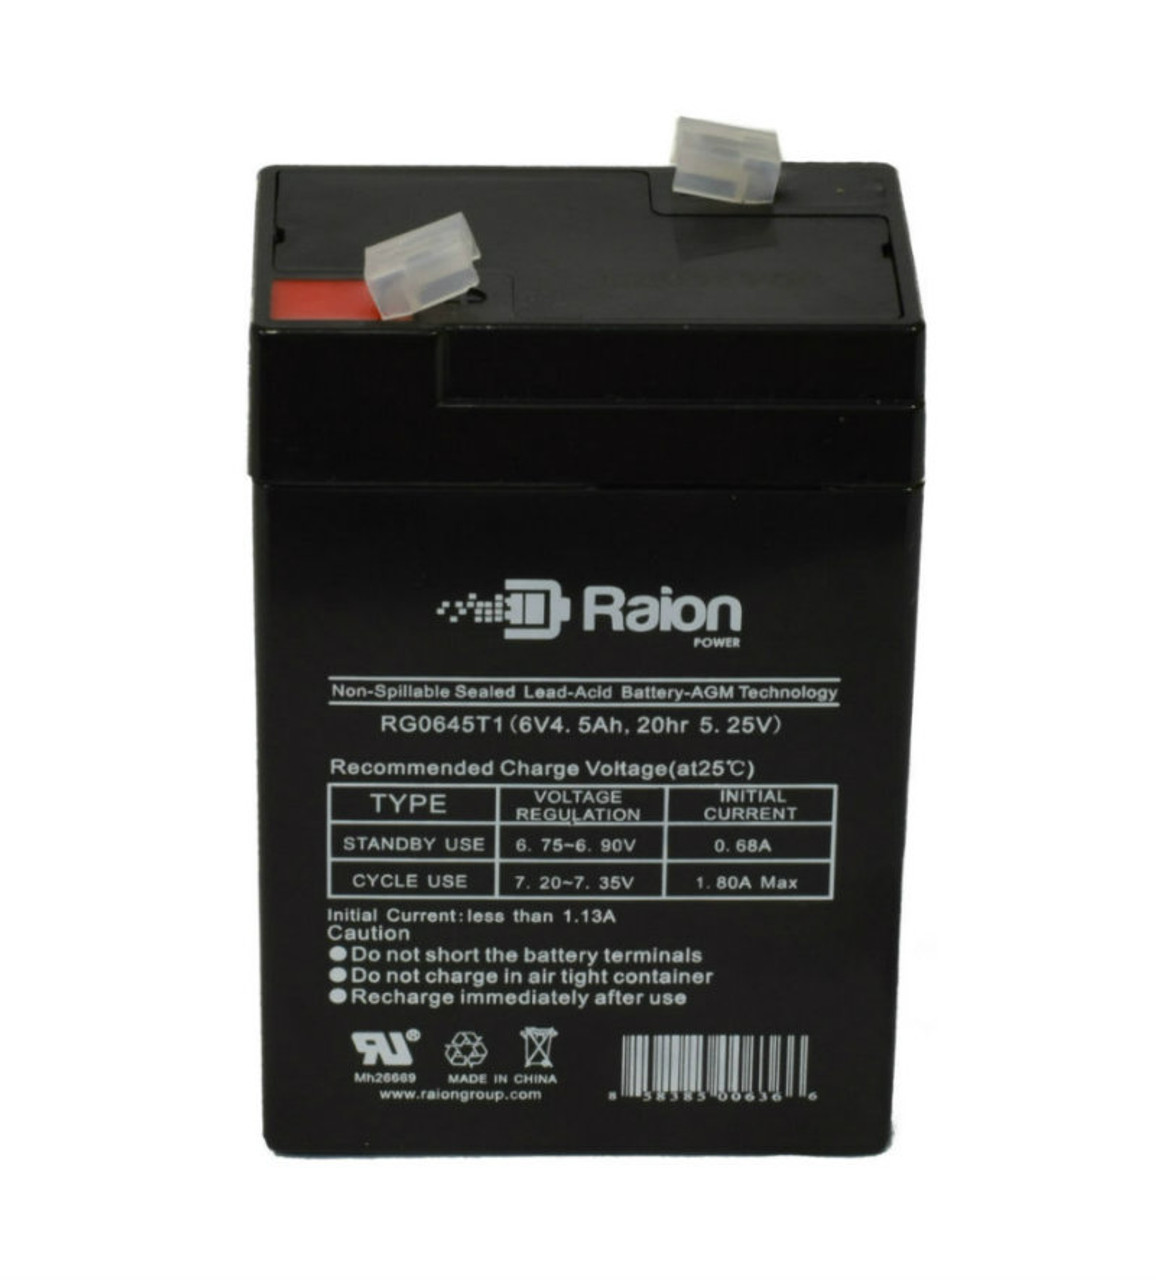 Raion Power RG0645T1 Replacement Battery Cartridge for Flying Power NS6-5